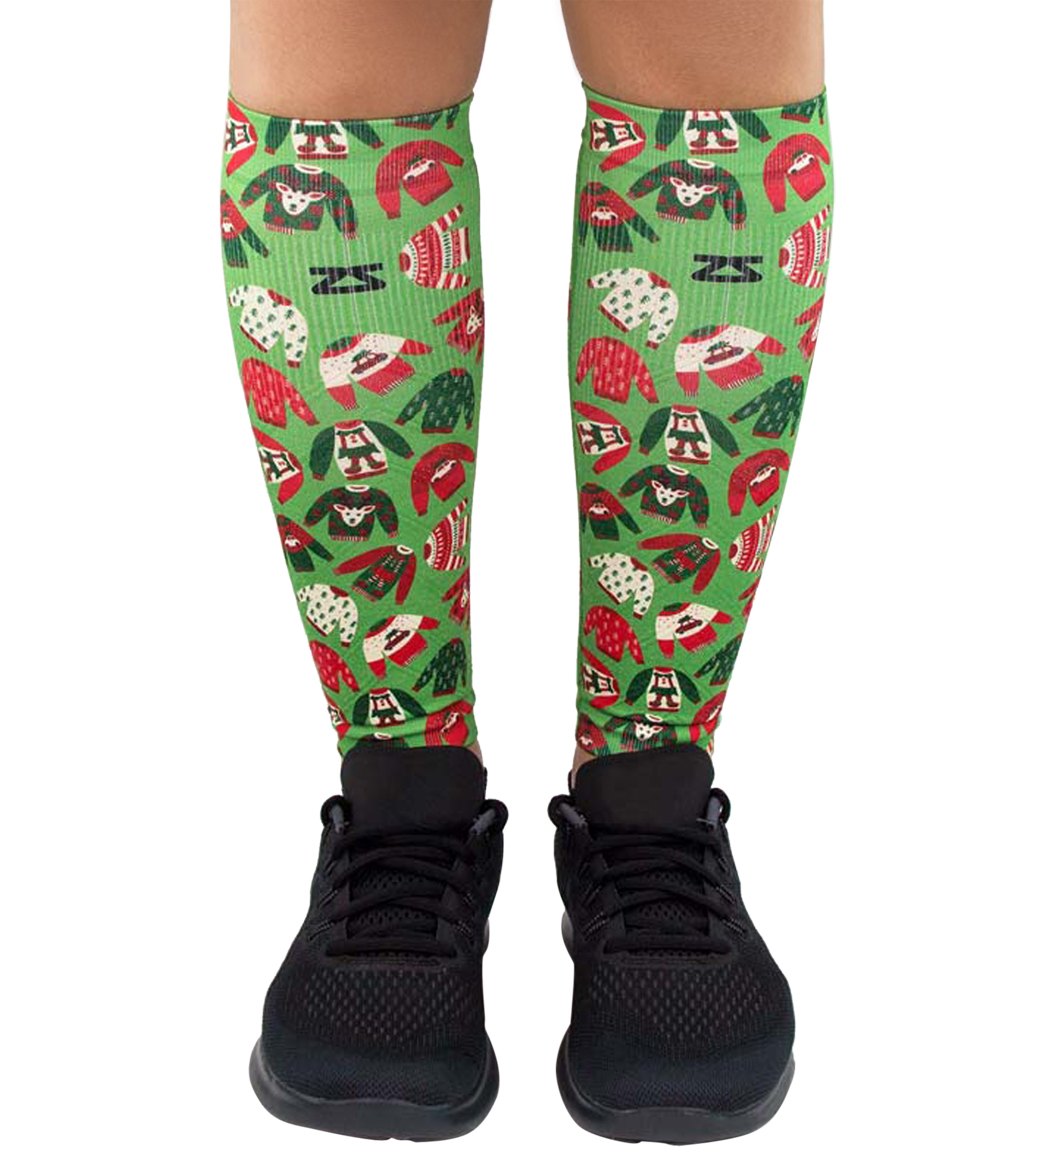 Zensah Ugly Christmas Sweater Compression Leg Sleeves Pair - Green L/Xl - Swimoutlet.com